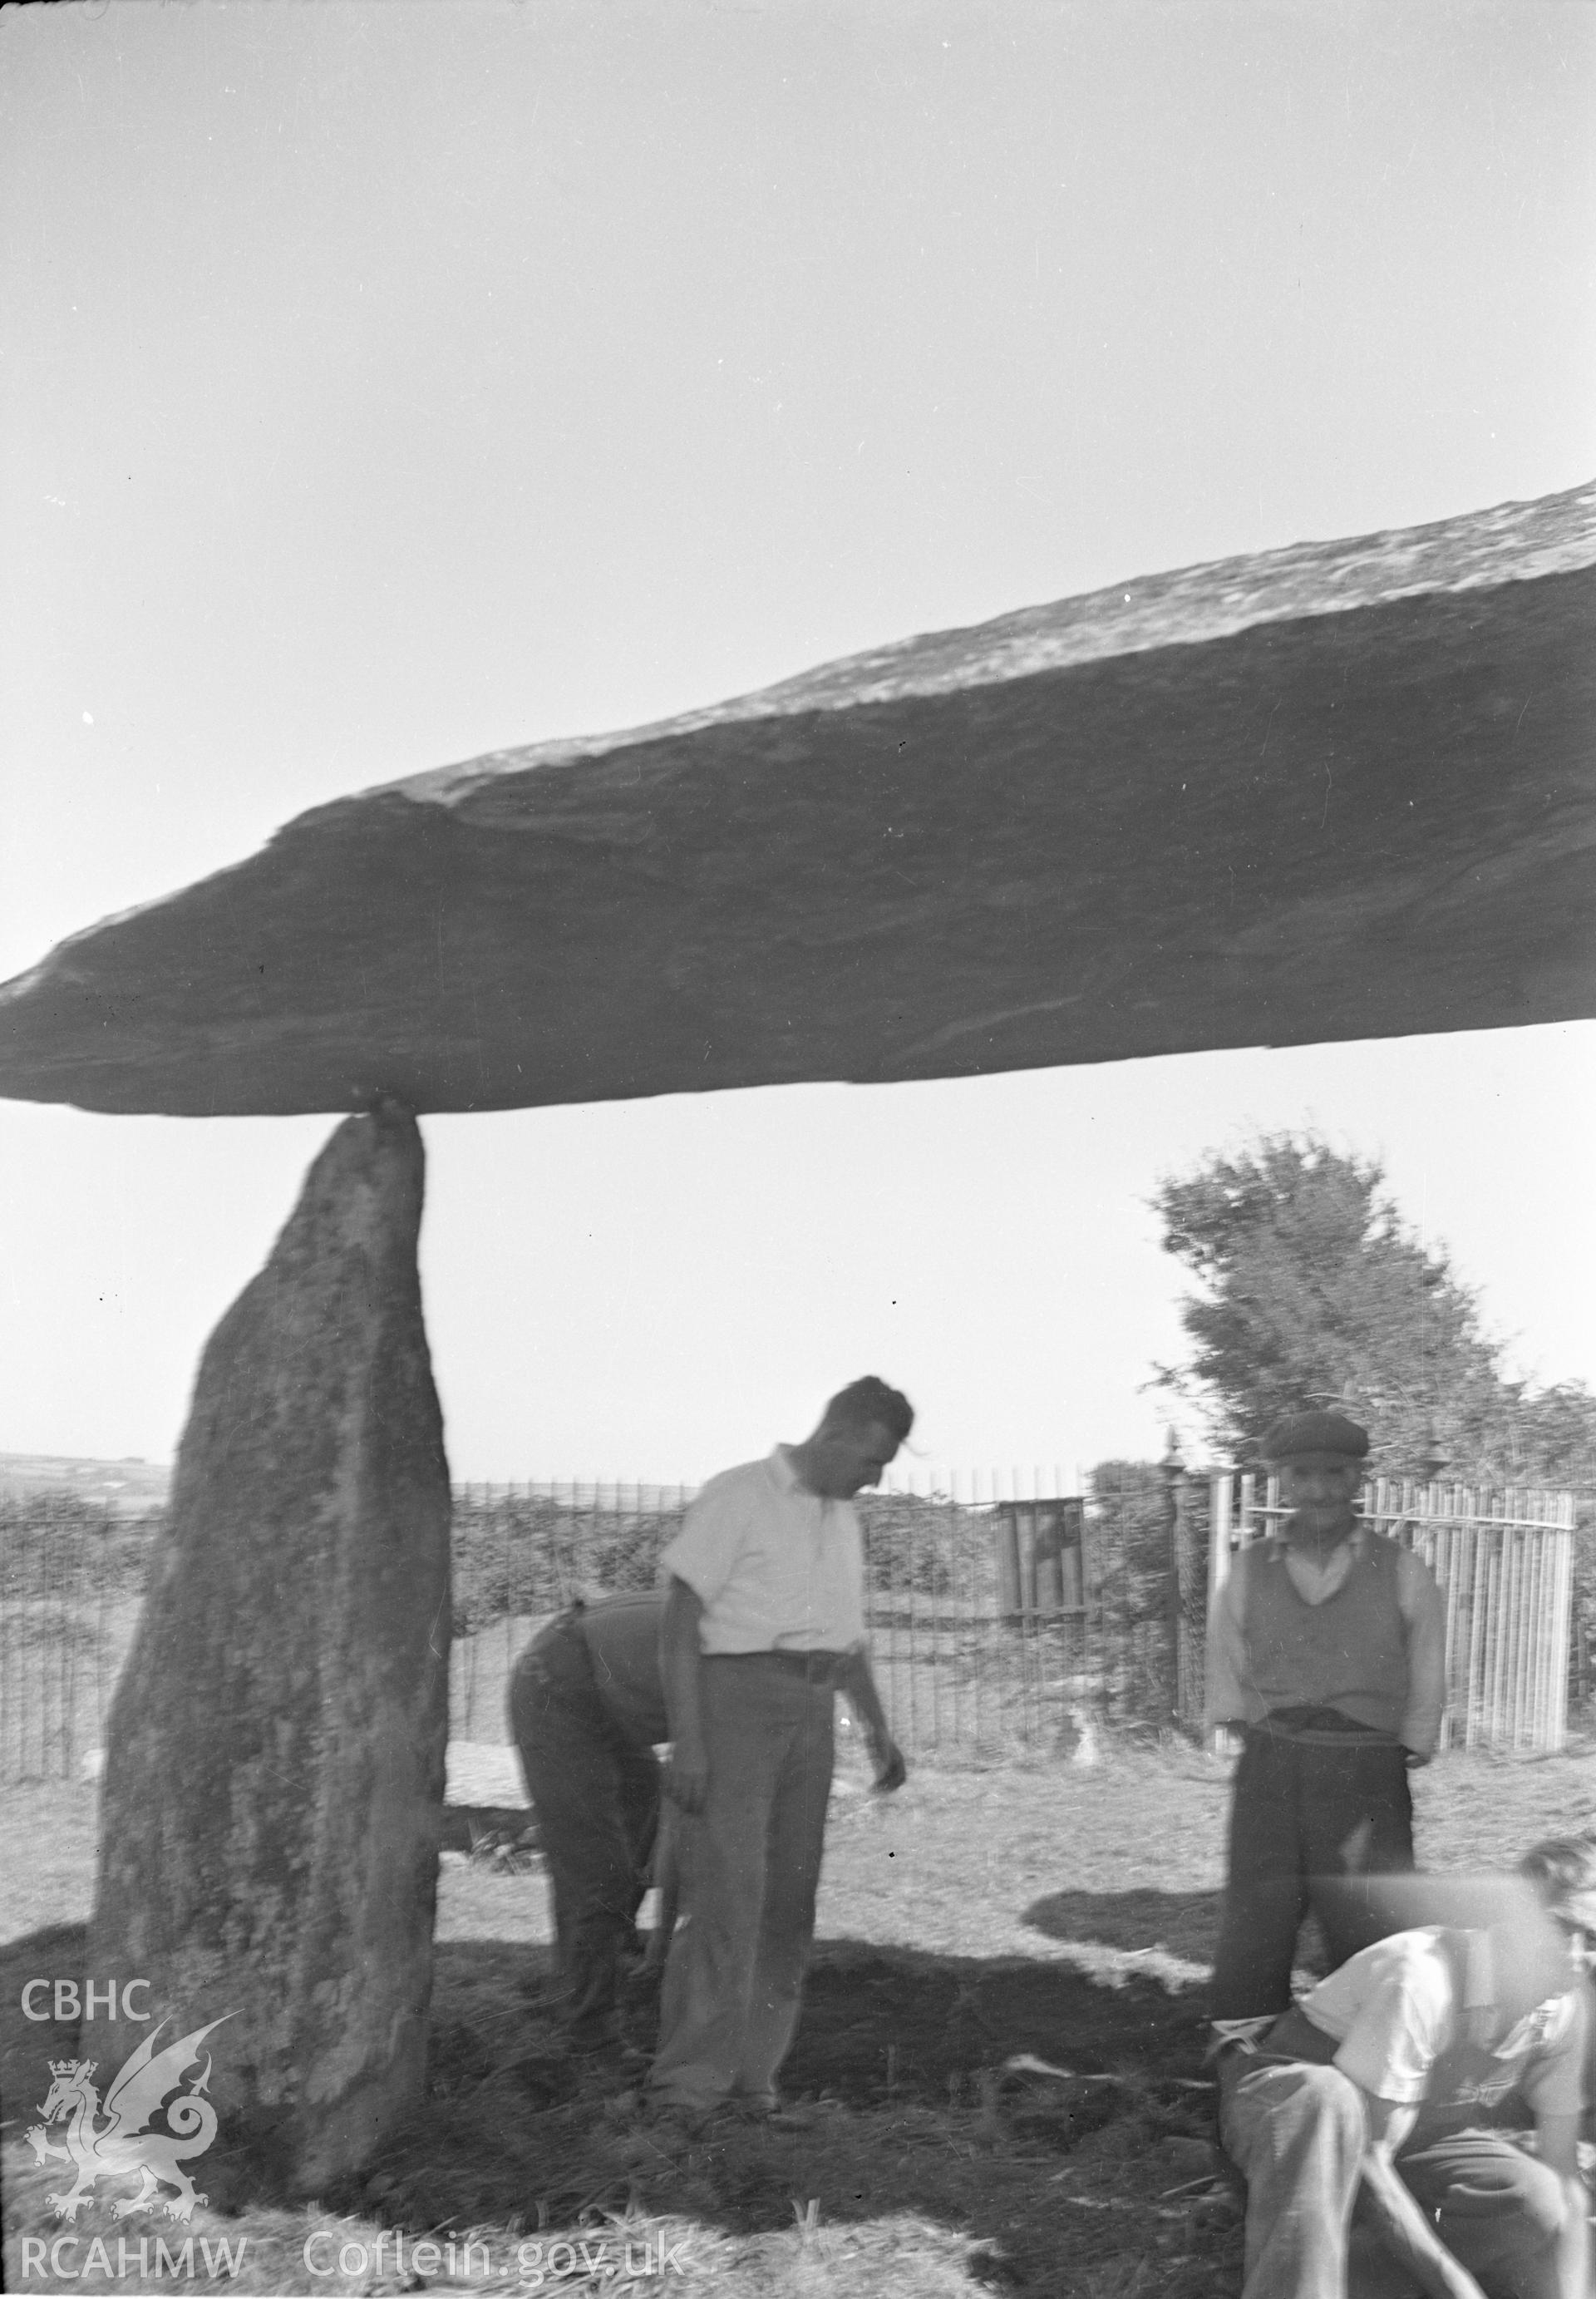 Digital copy of a nitrate negative showing Pentre Ifan Burial Chamber.